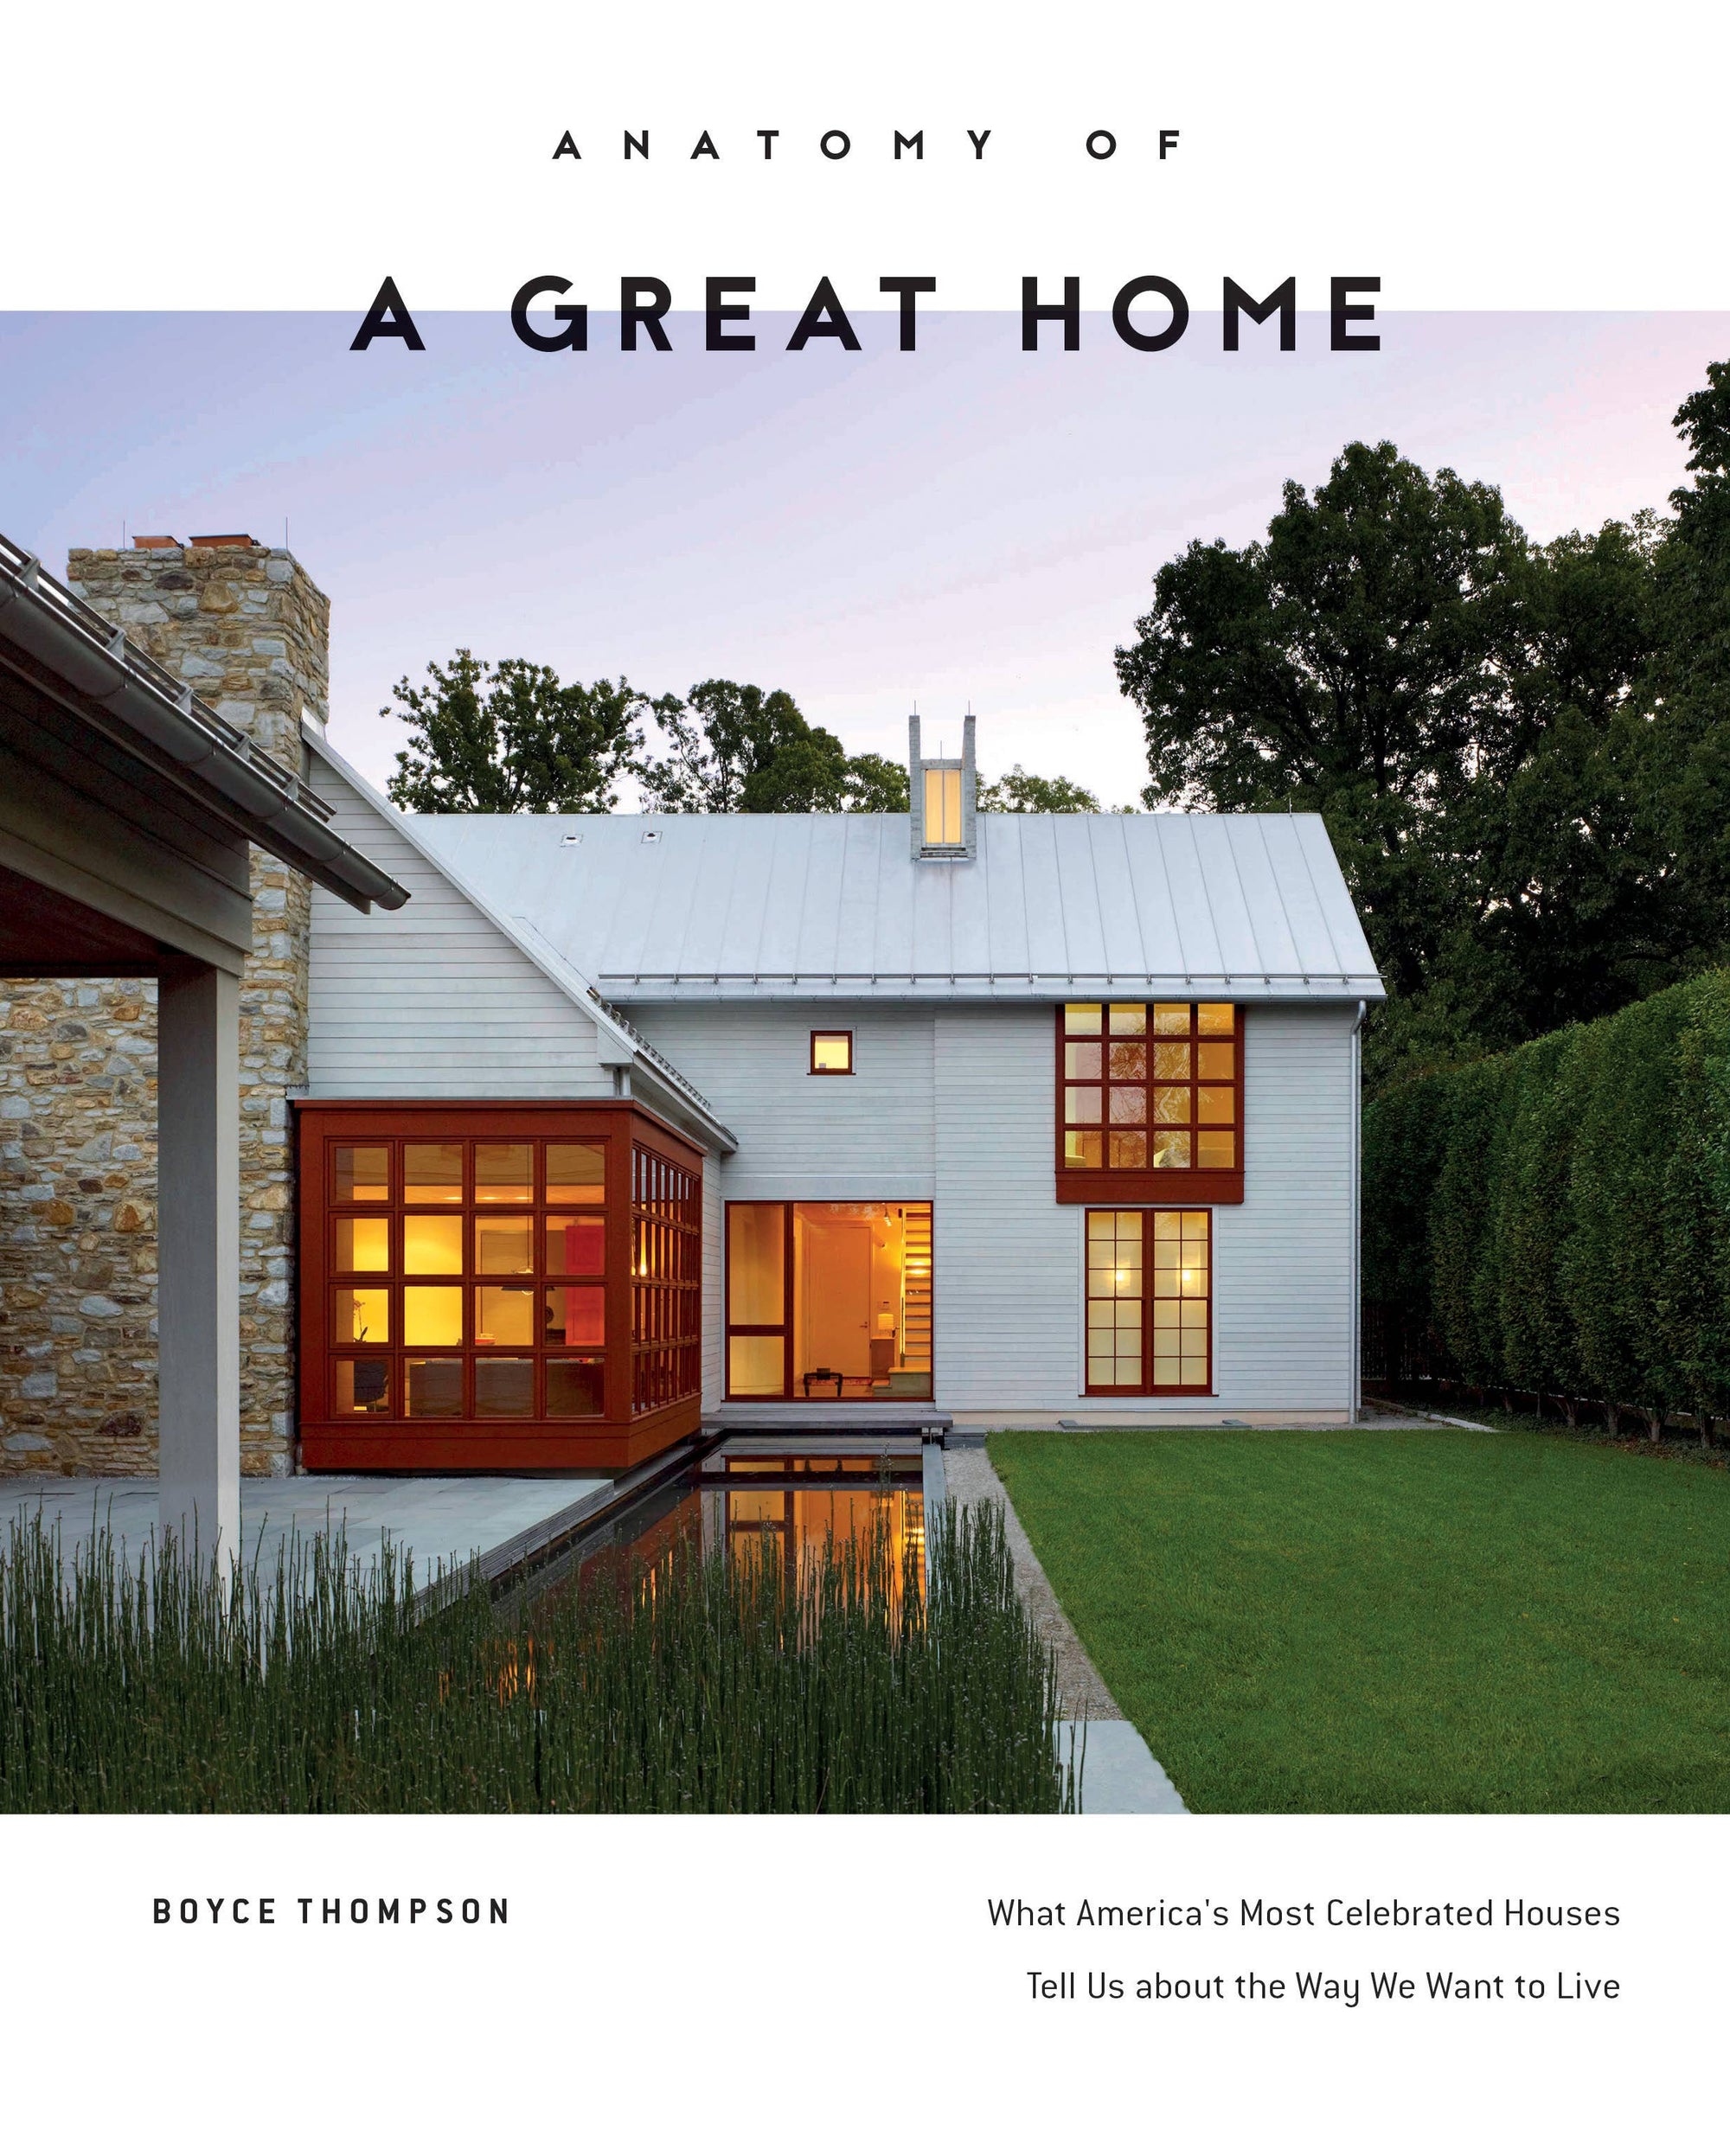 Anatomy of a Great Home